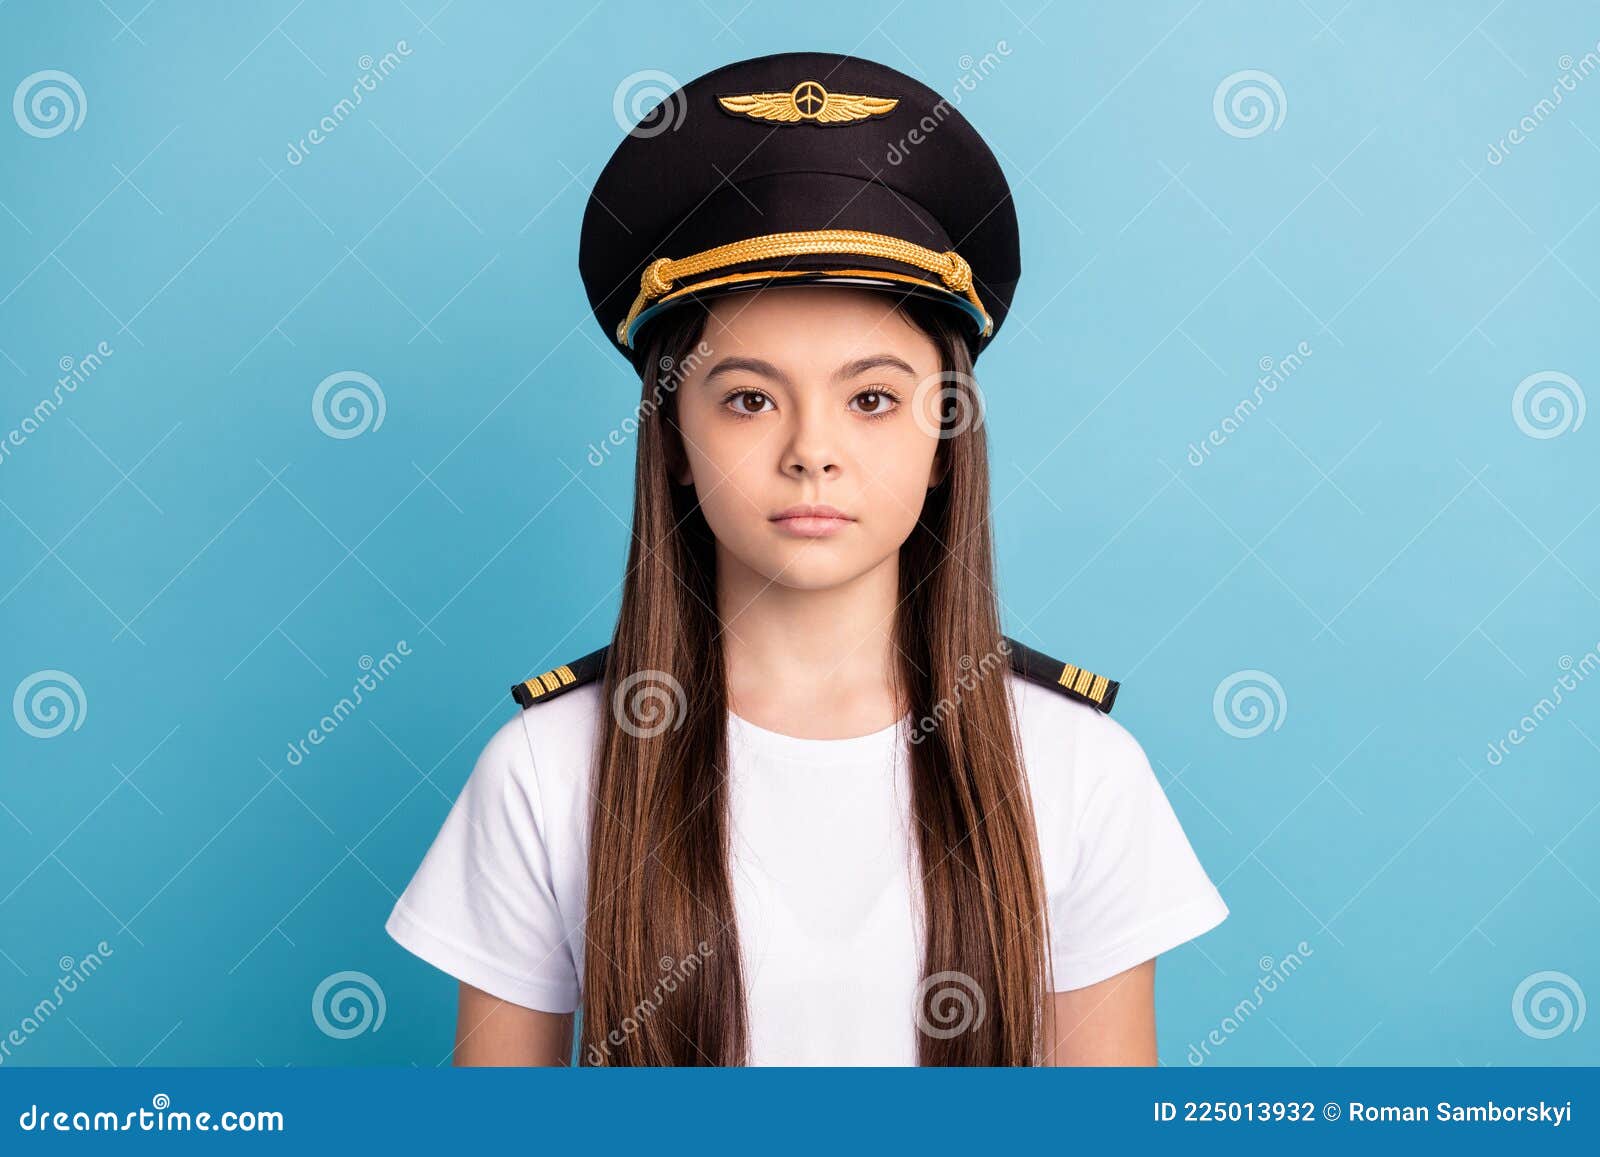 Photo of Young Serious Good Looking Little Girl in Pilot Cap and White  T-shirt with Long Brunette Hair on Blue Stock Photo - Image of captain,  headshot: 225013932